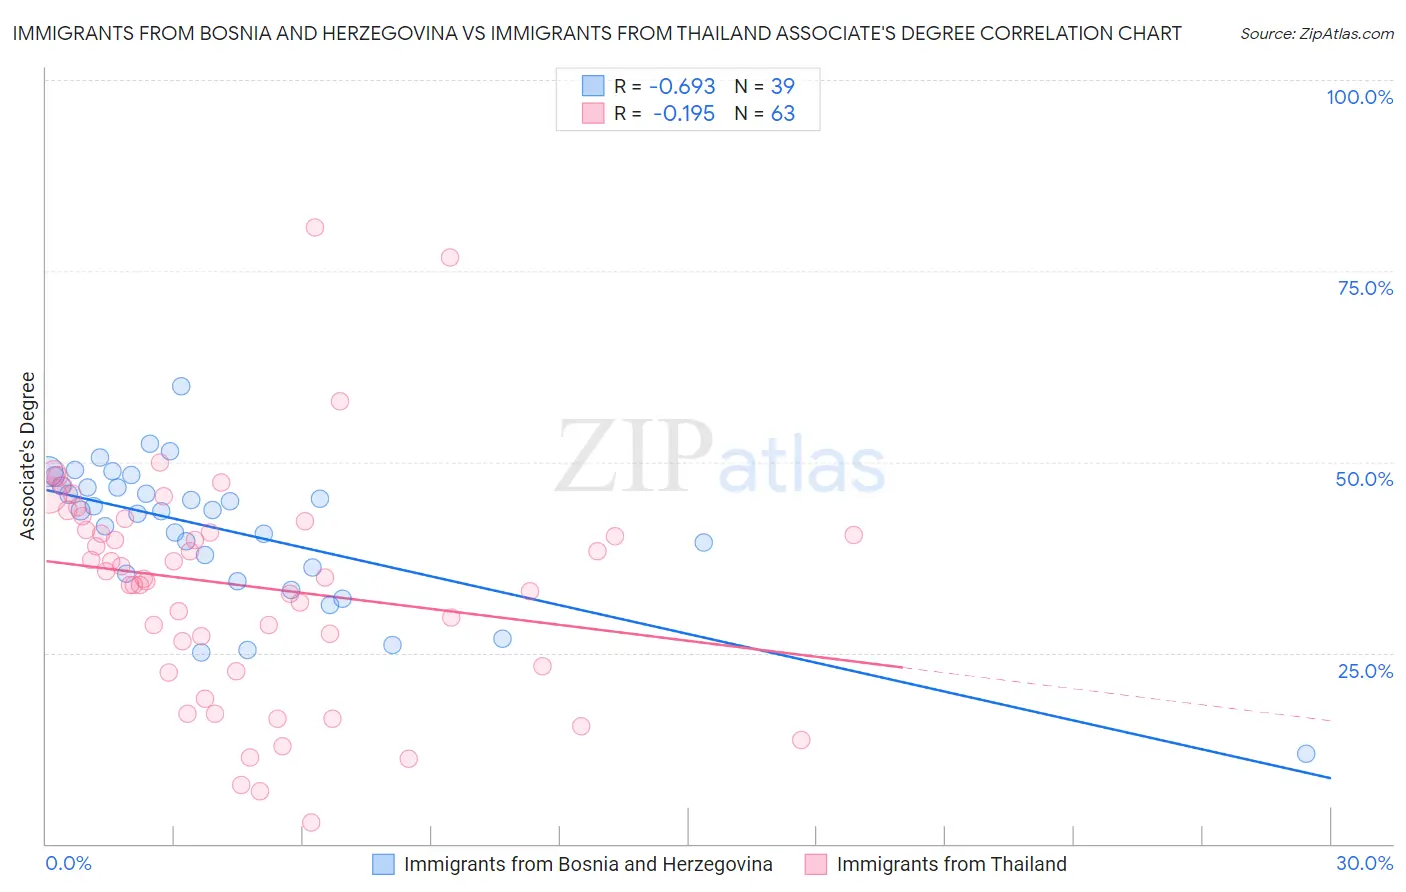 Immigrants from Bosnia and Herzegovina vs Immigrants from Thailand Associate's Degree